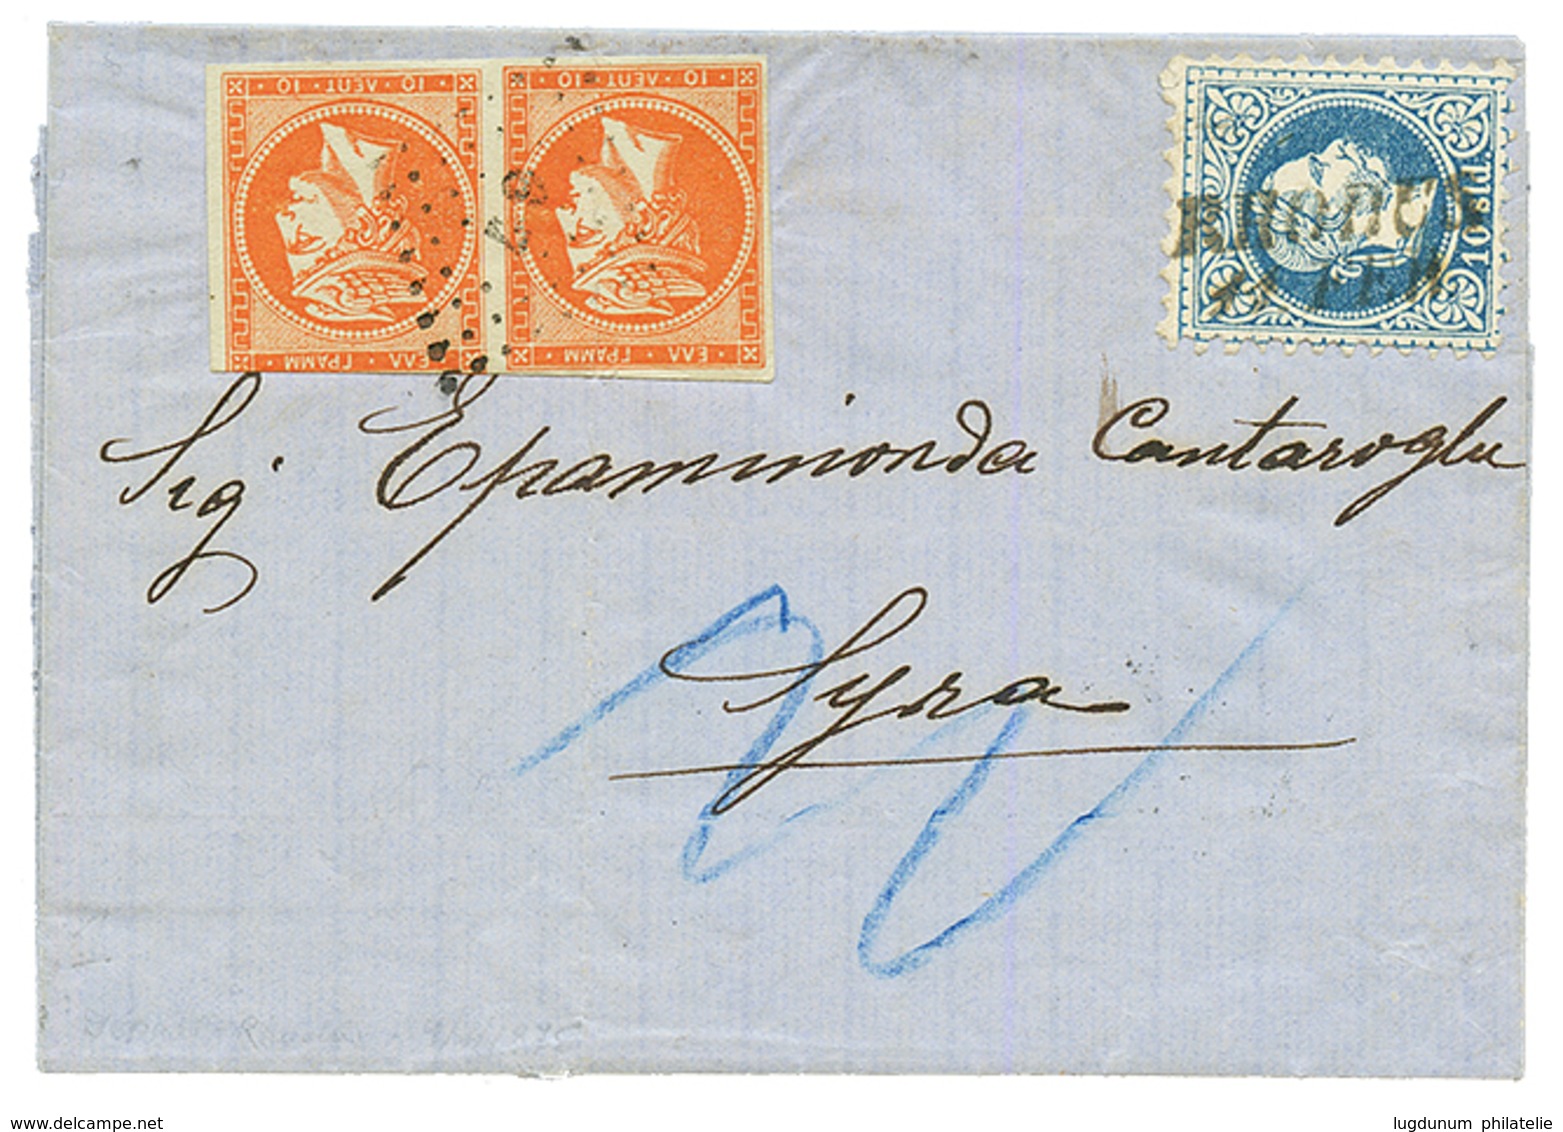 GREECE : 1875 10 SOLDI Canc. RHODUS + GRECE Pair 10l (1 Stamp Cut) Canc. 67 On Entire Letter To SYRA. MIXT Franking From - Oostenrijkse Levant